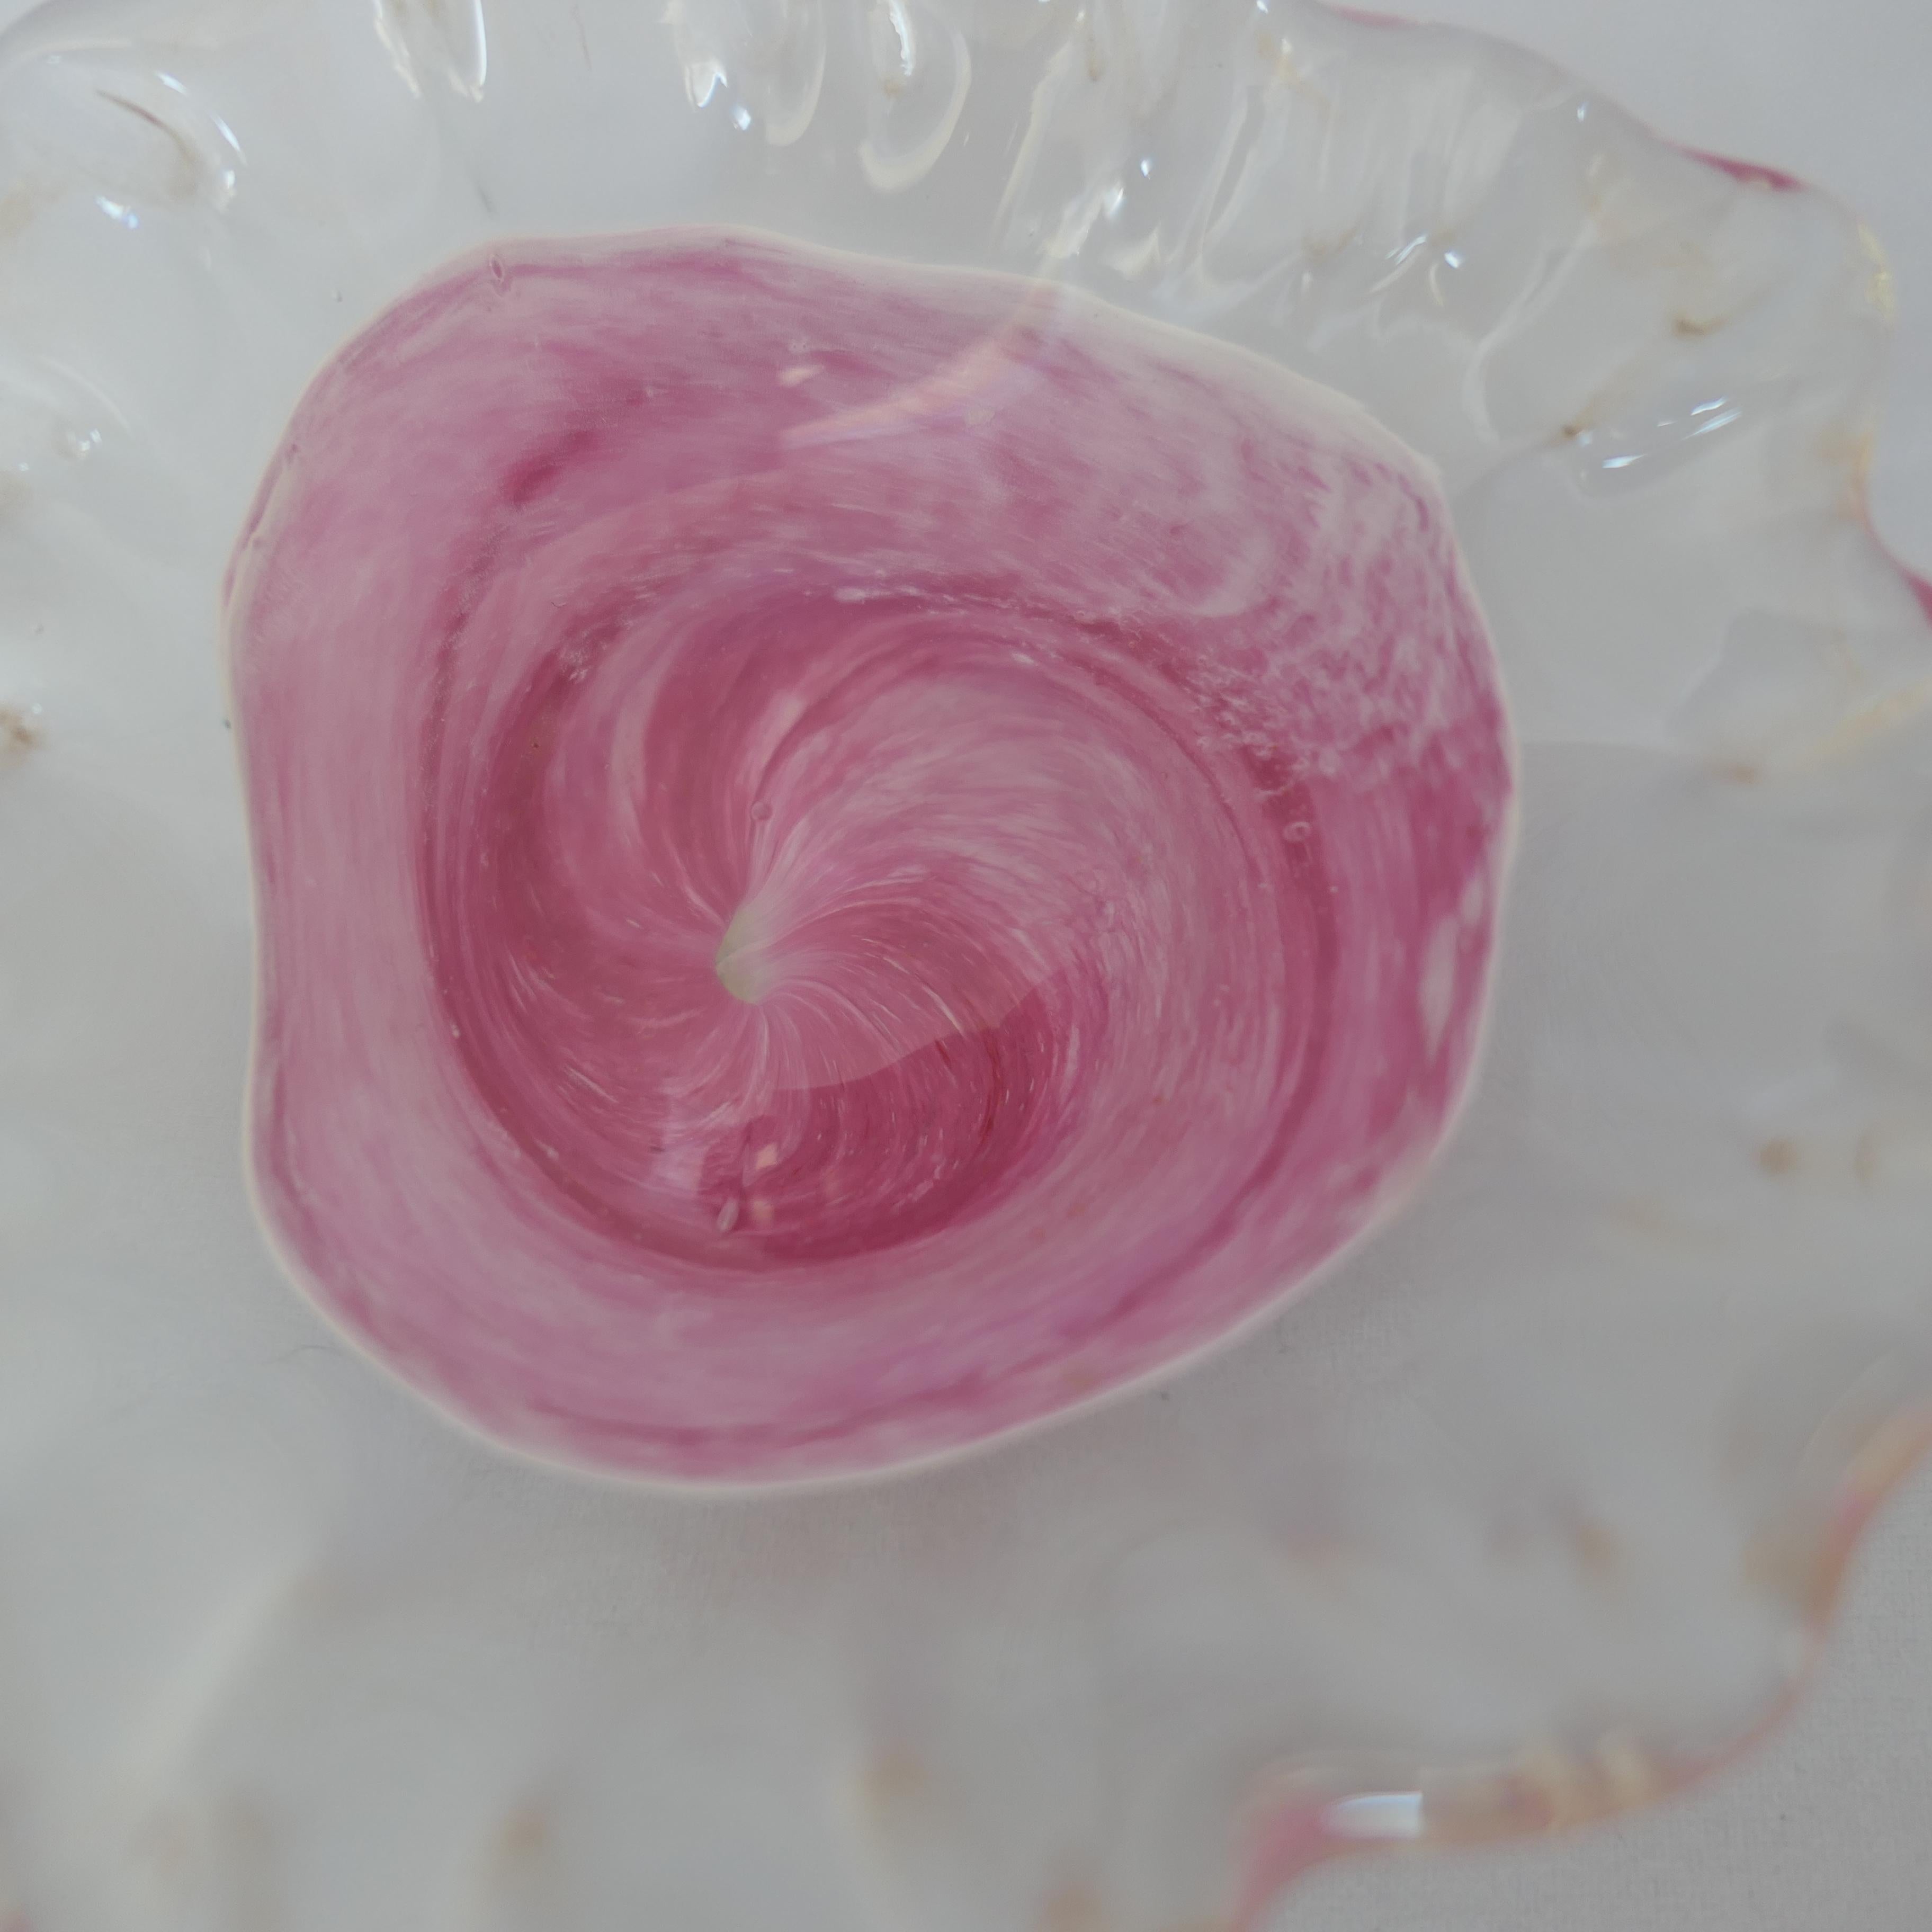 Isle of Wight Art Glass Cased Dish in Shades of Pink, with a Ruffled top    For Sale 3